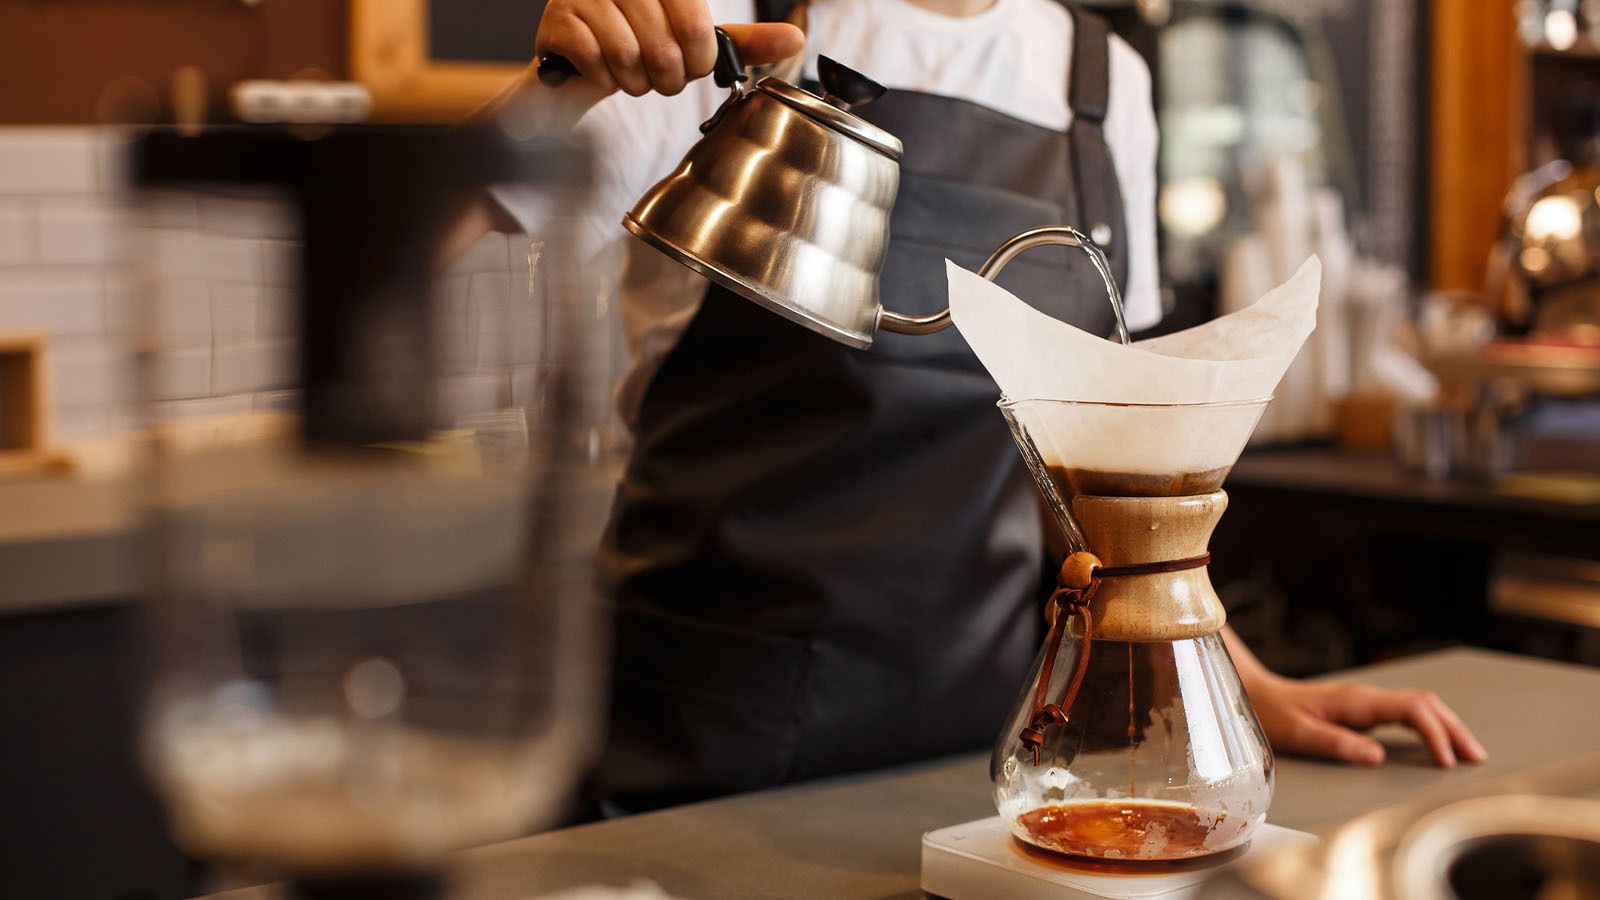 The 25 best coffee products we tested in 2021 | CNN Underscored